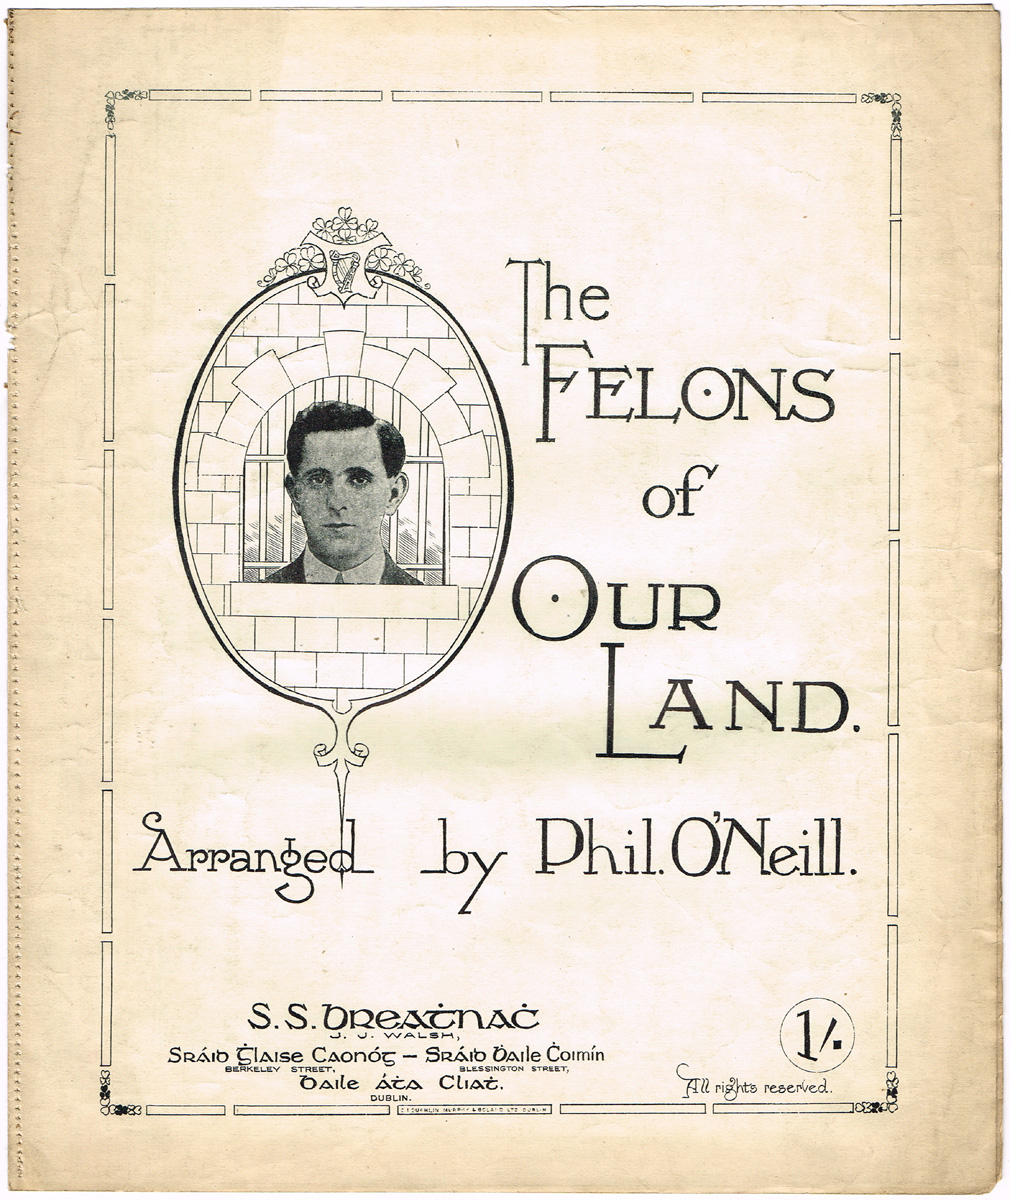 The Felons of Our Land" sheet music." at Whyte's Auctions